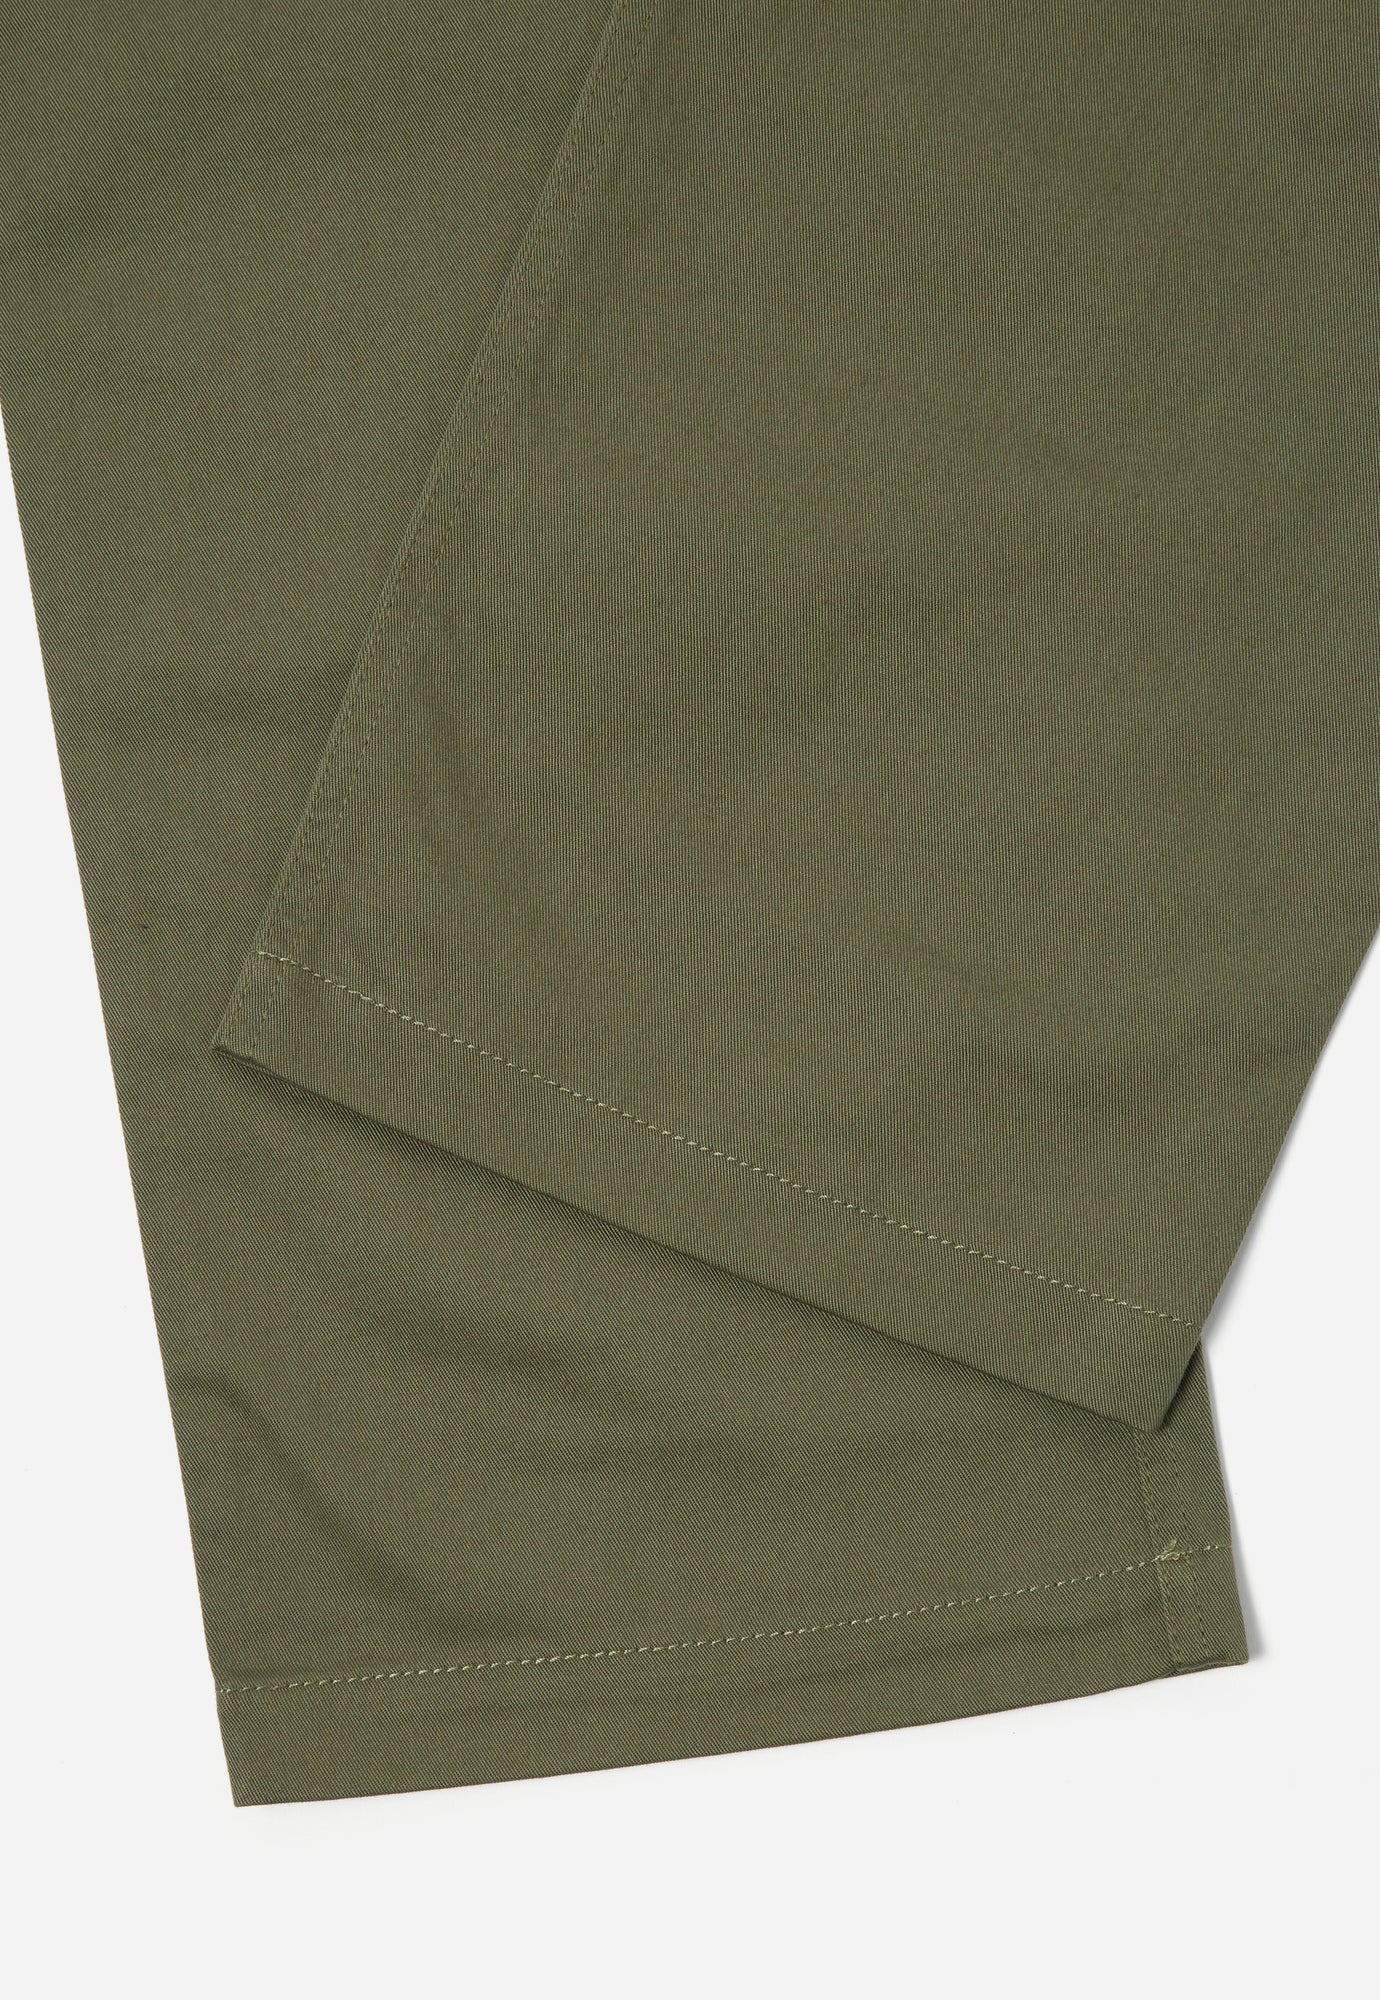 Universal Works Fatigue Pant in Light Olive Twill